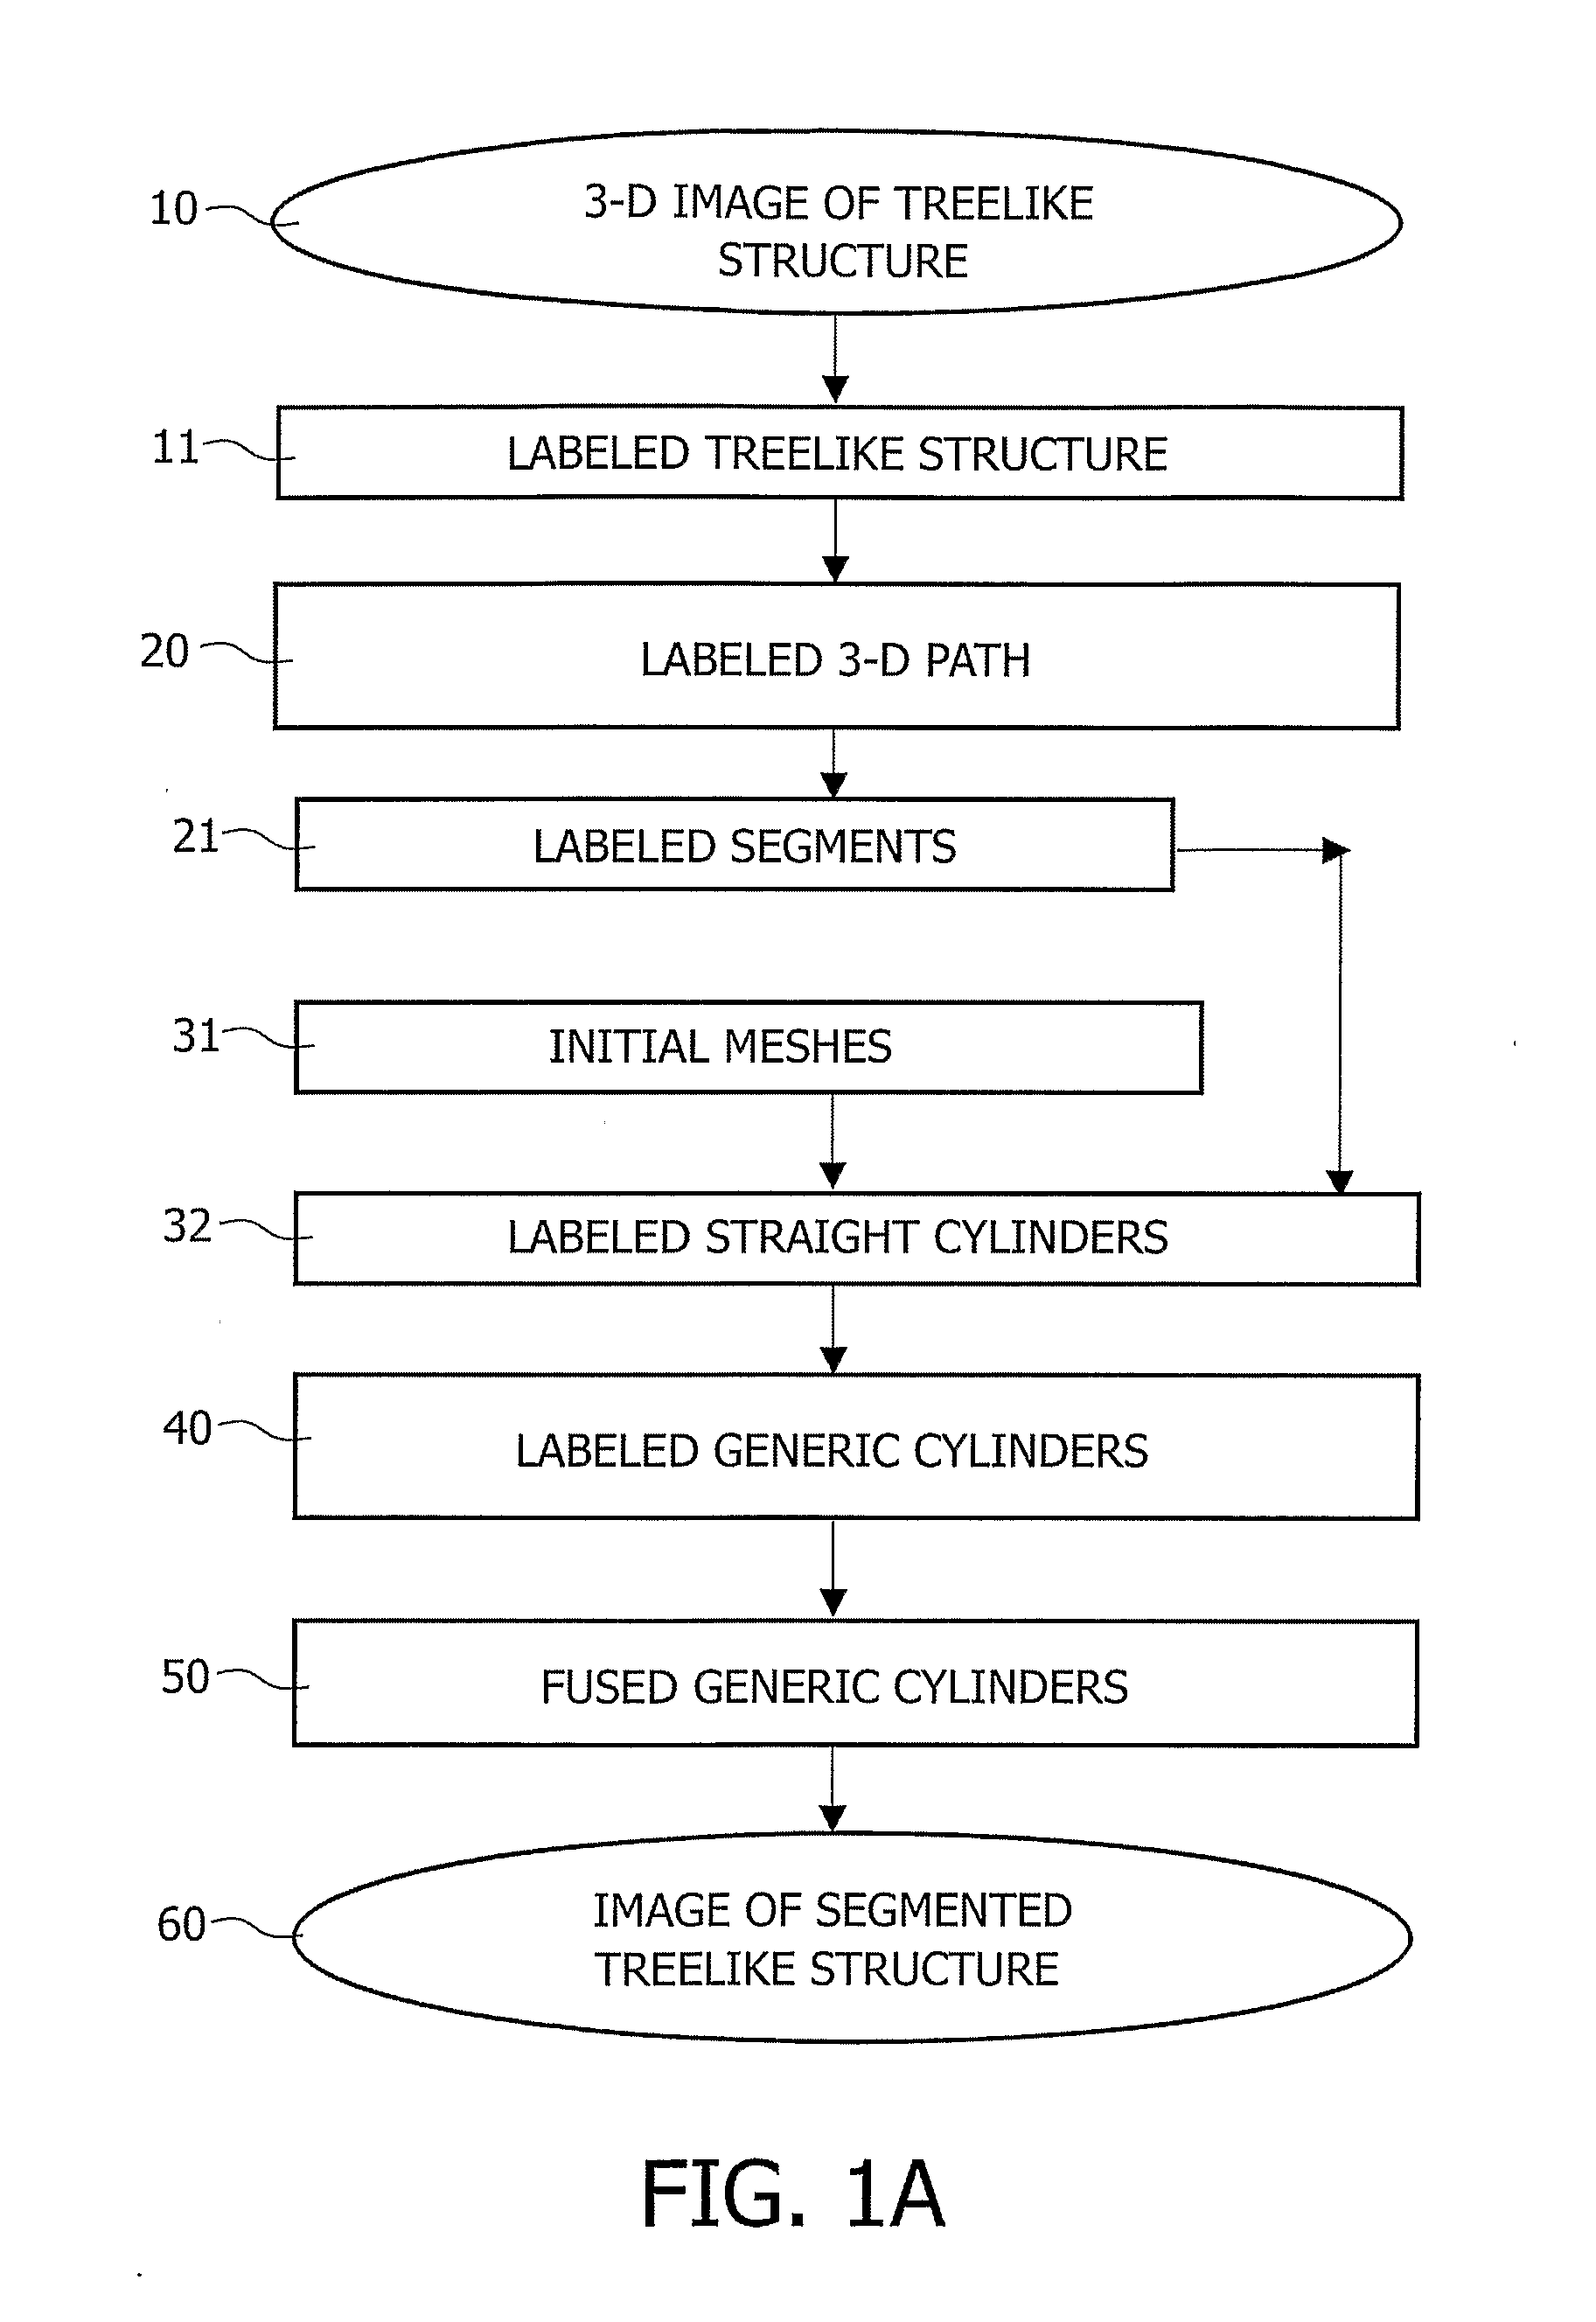 Image Processing System for Automatic Segmentation of a 3-D Tree-Like Tubular Surface of an Object, Using 3-D Deformable Mesh Models